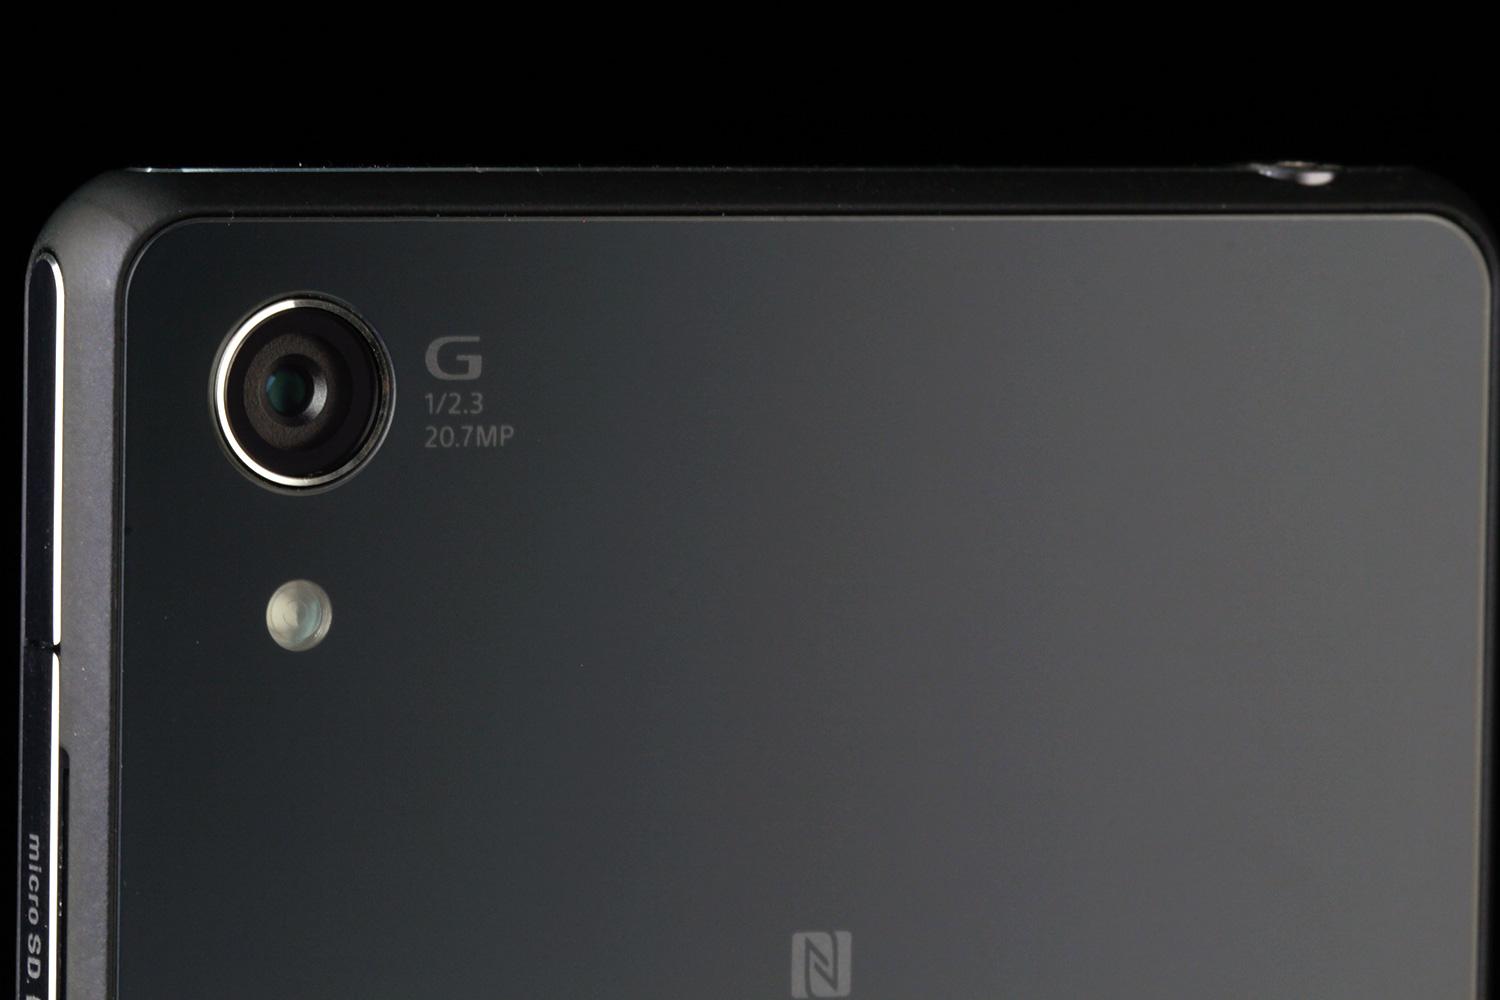 Overleg joggen Malawi Sony Xperia Z3v Review: Sony's Latest Xperia is Waterproof and Classy |  Digital Trends